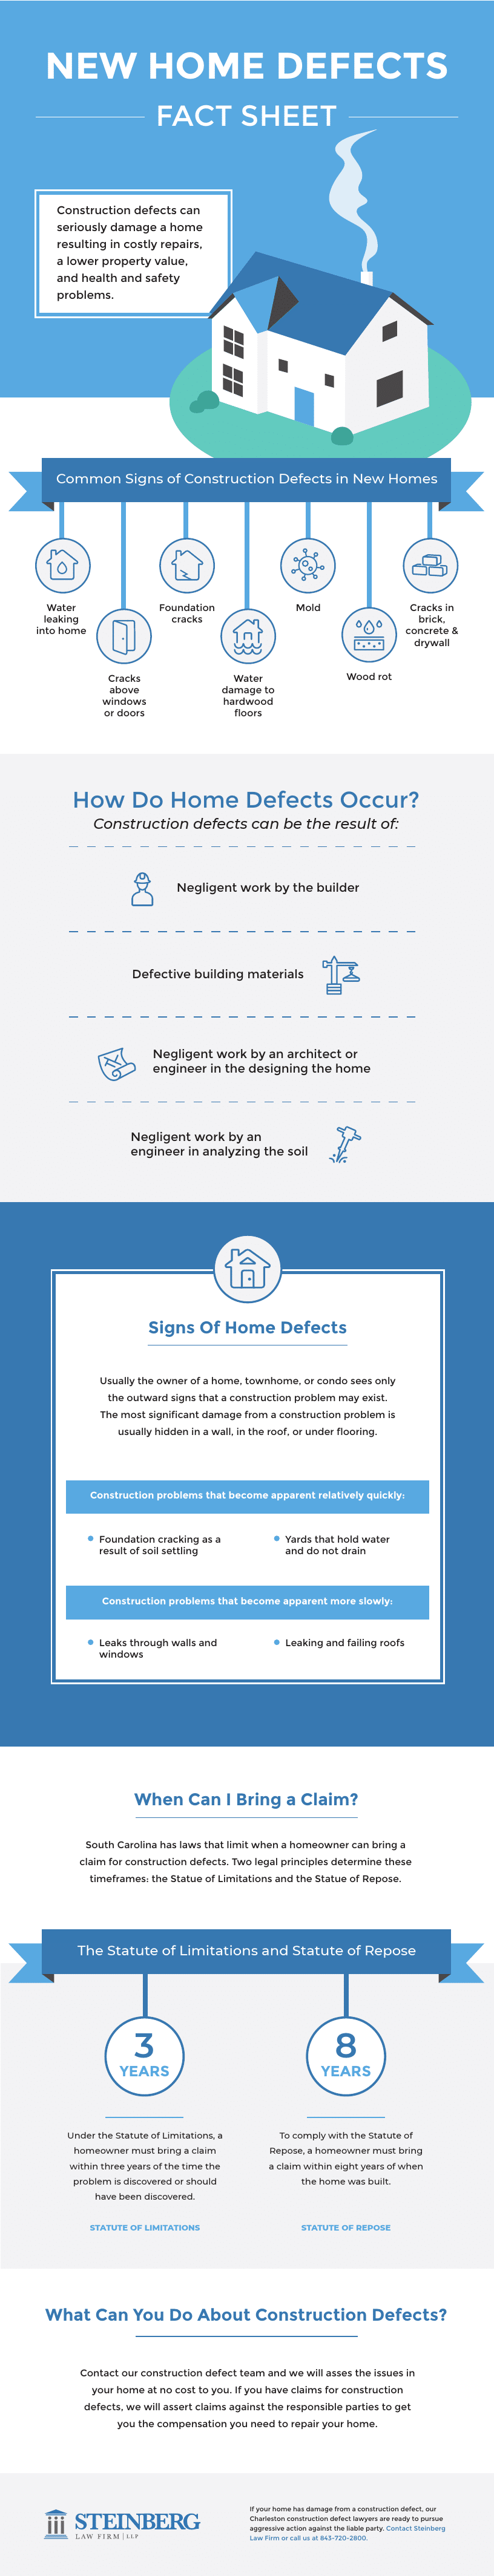 New Home Defects Fact Sheet